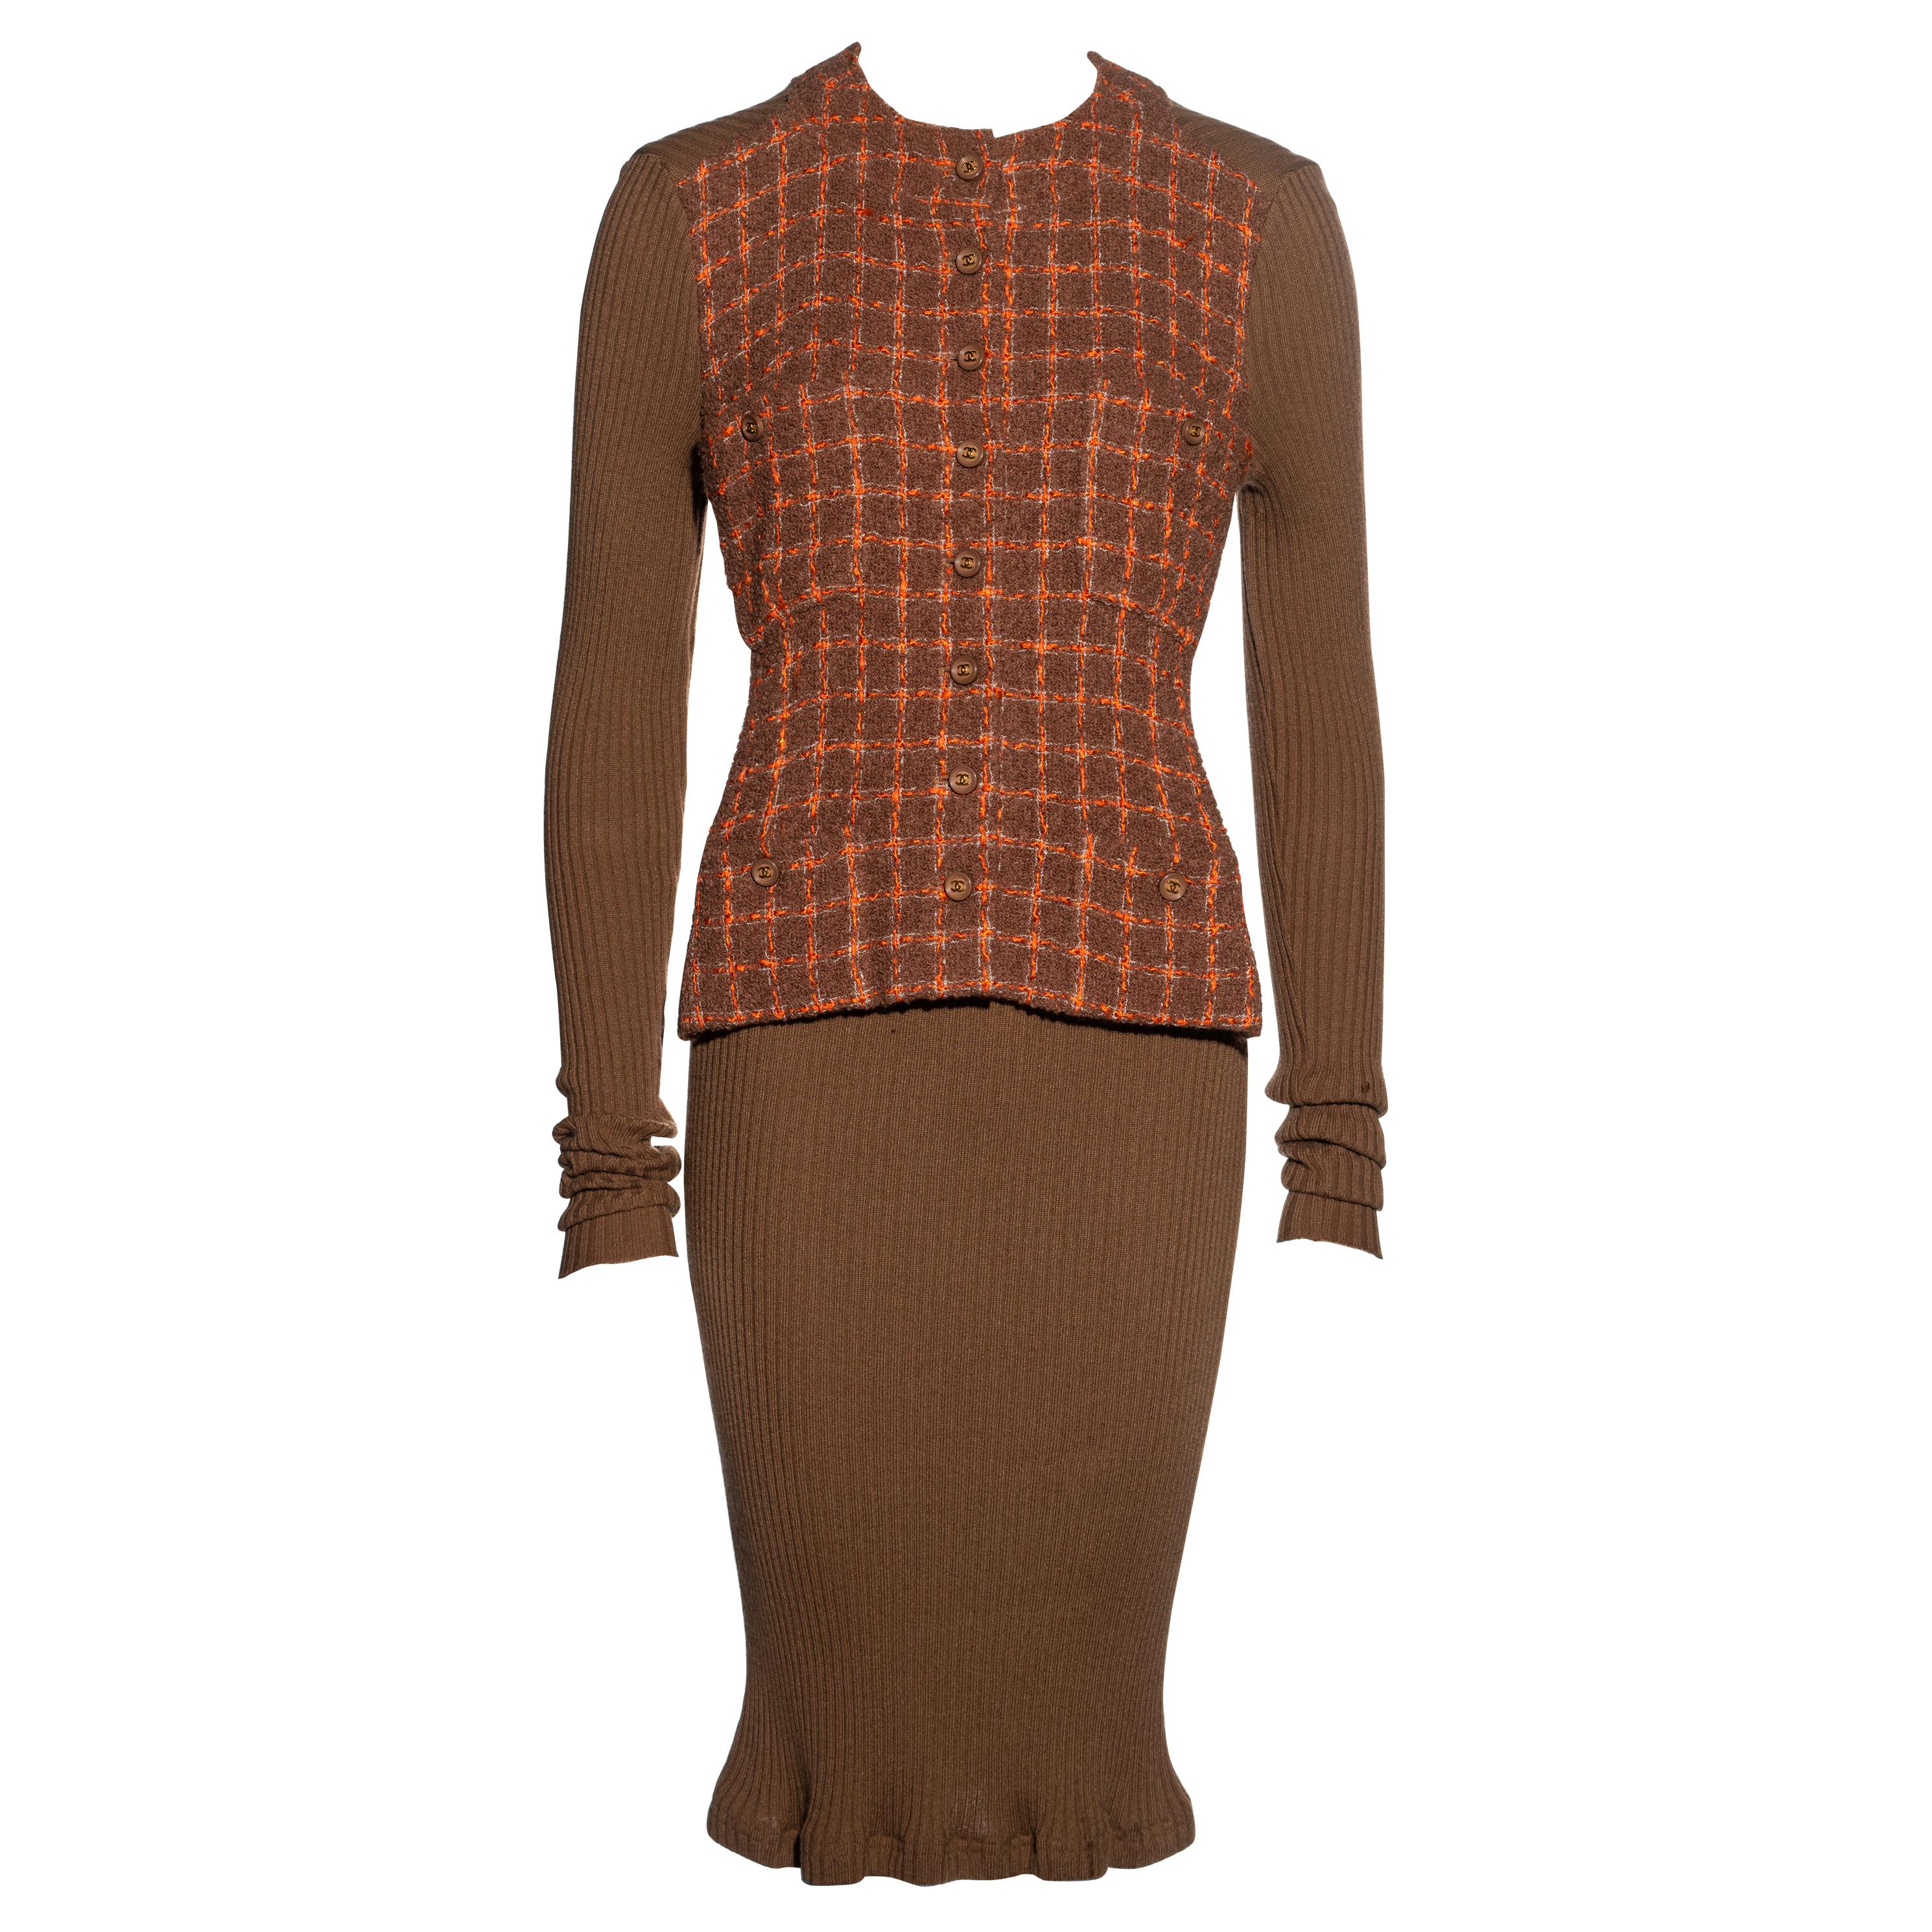 Chanel by Karl Lagerfeld orange and brown knit and tweed jacket dress, fw 1995